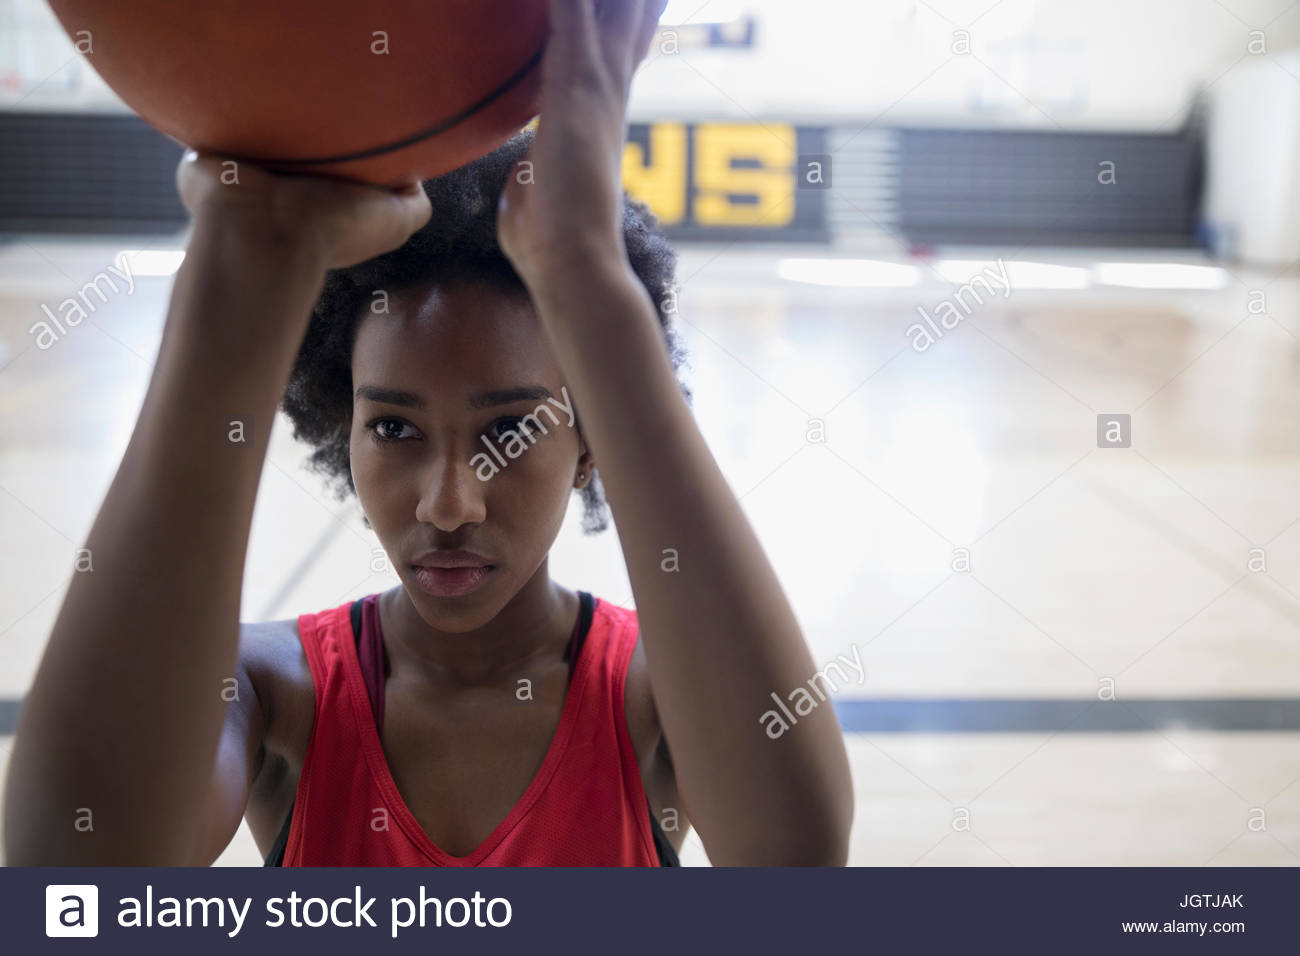 Focused female college basketball player shooting free throw in gymnasium Stock Photo